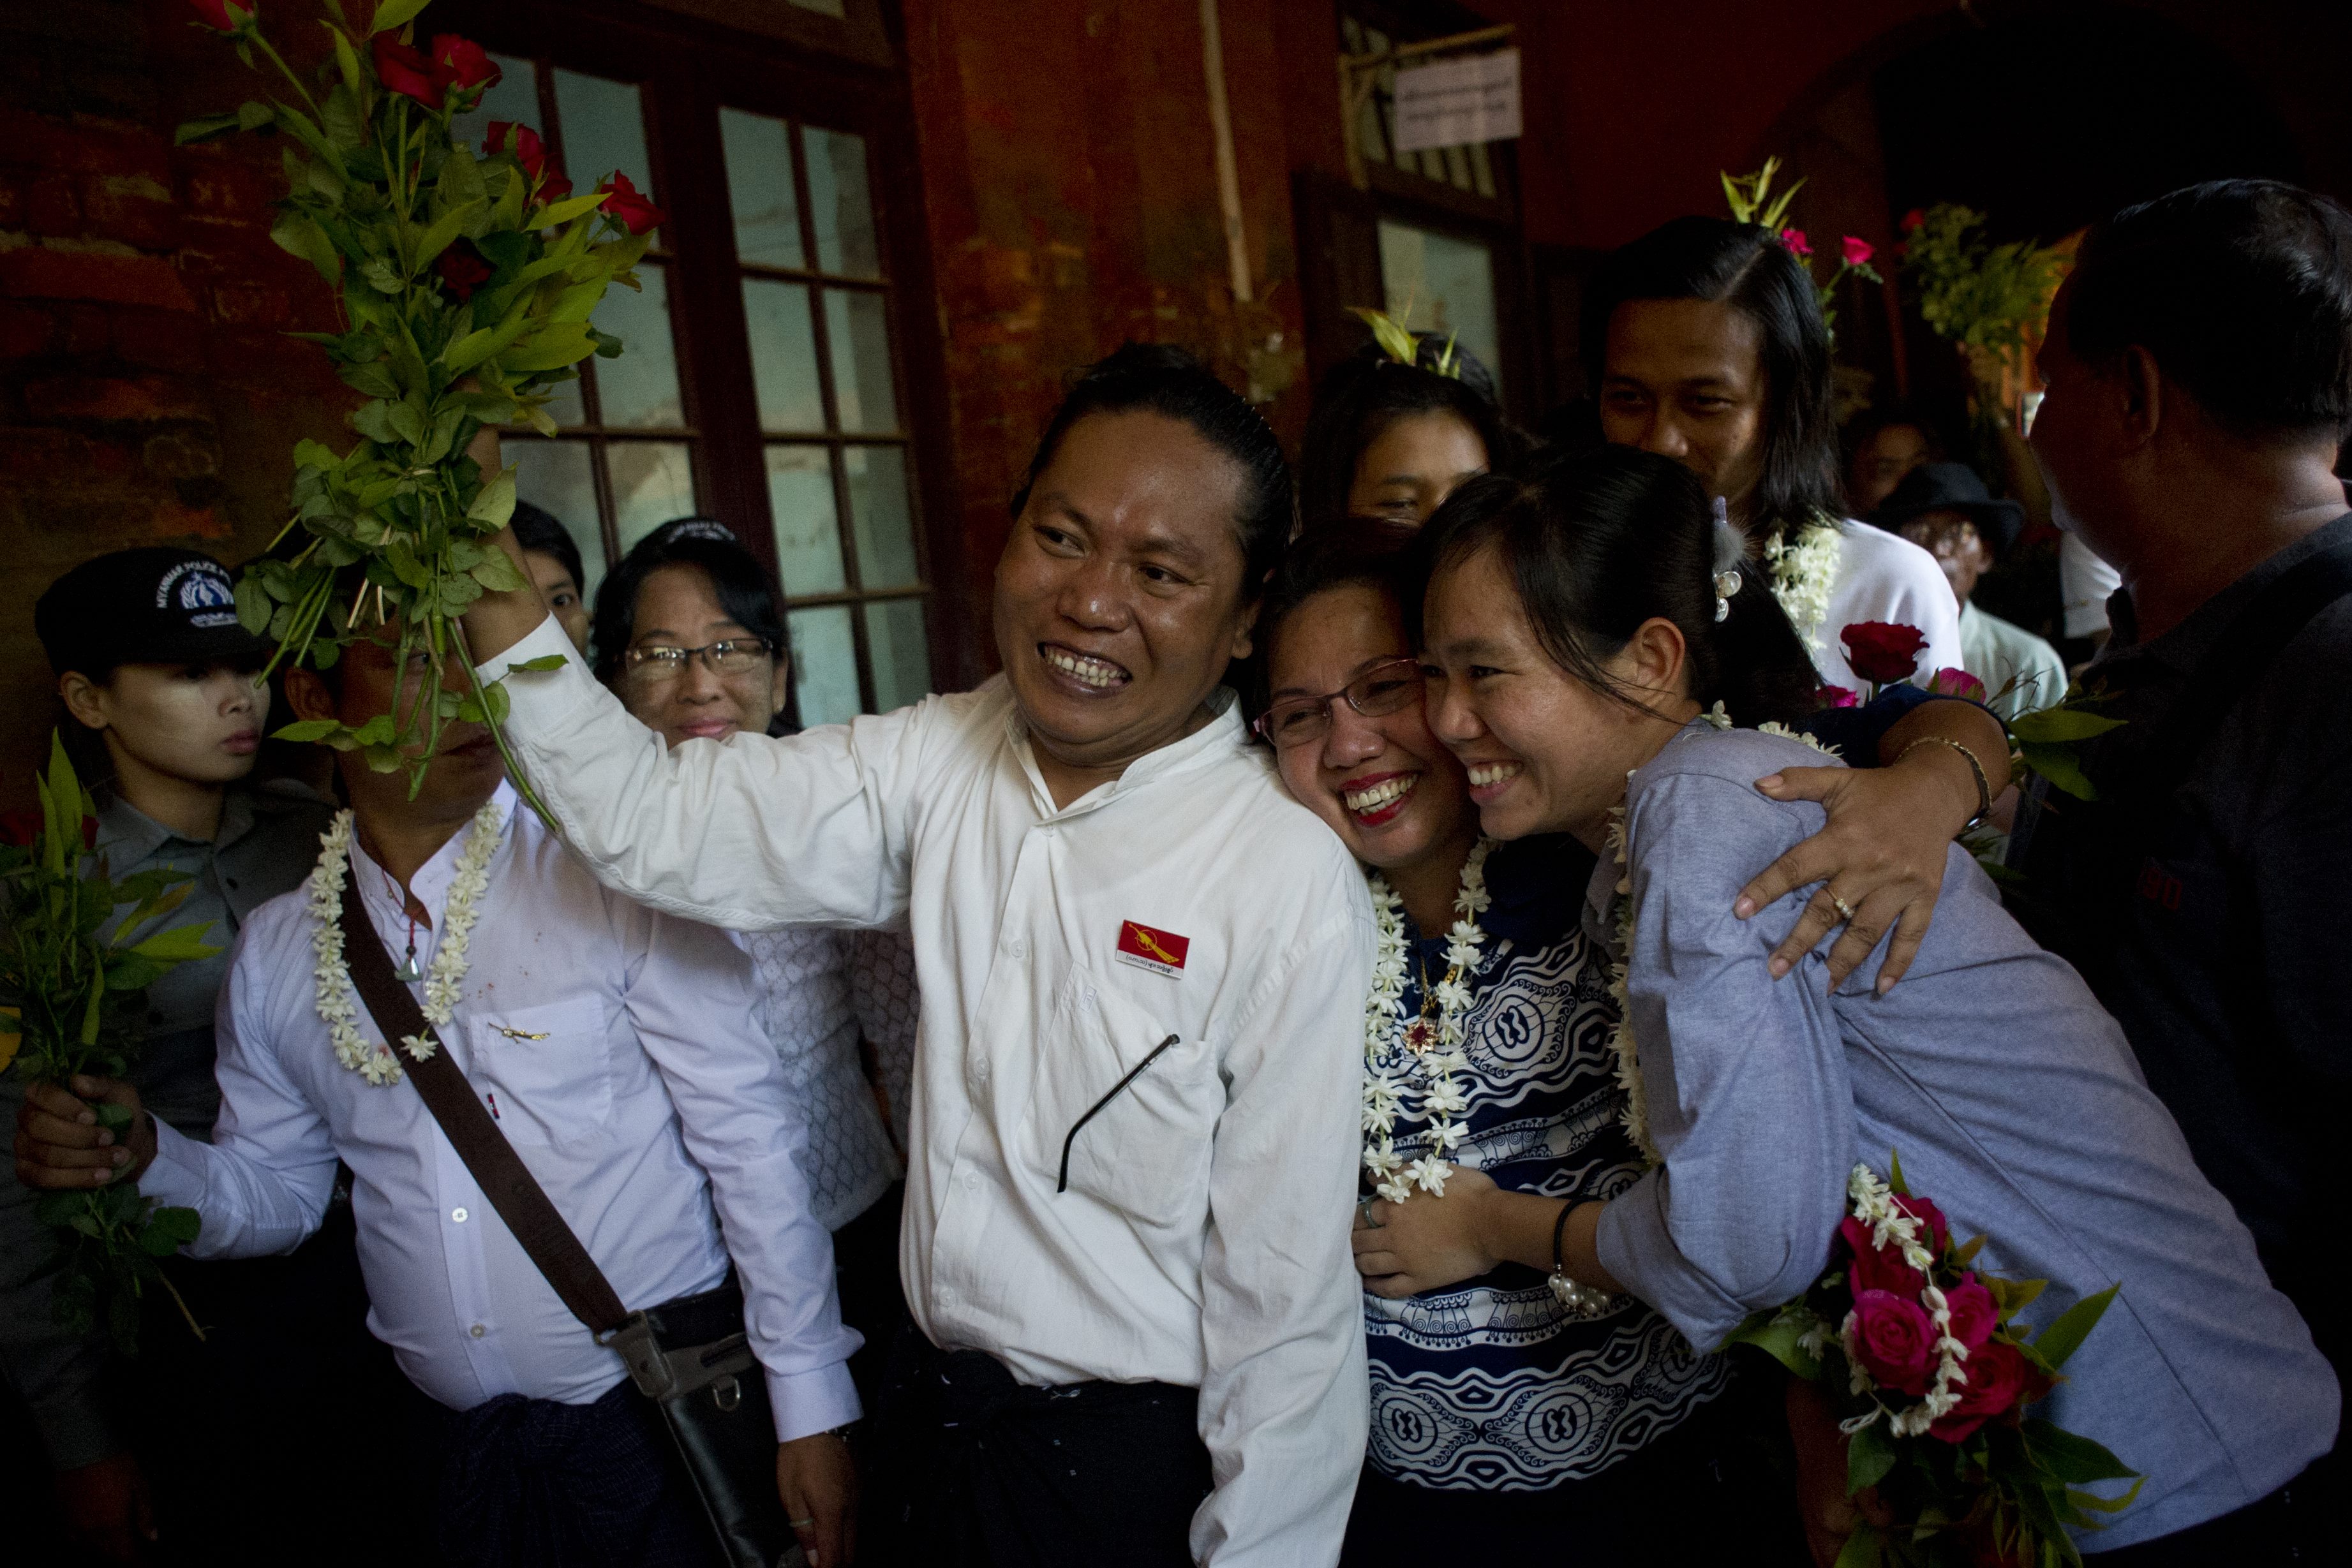 Family members welcome student protest leaders Nandar Sitt Aung (L) and Phyo Phyo Aung (R) as they arrives for a hearing at her trial in Tharrawaddy town, Bago Region in Myanmar on April 8, 2016. Myanmar's Aung San Suu Kyi on April 7, vowed to press for the release of political prisoners and student activists, hinting that a mass amnesty may be imminent as her government seeks to stamp its mark on power in the former junta-run nation. / AFP / YE AUNG THU        (Photo credit should read YE AUNG THU/AFP/Getty Images)